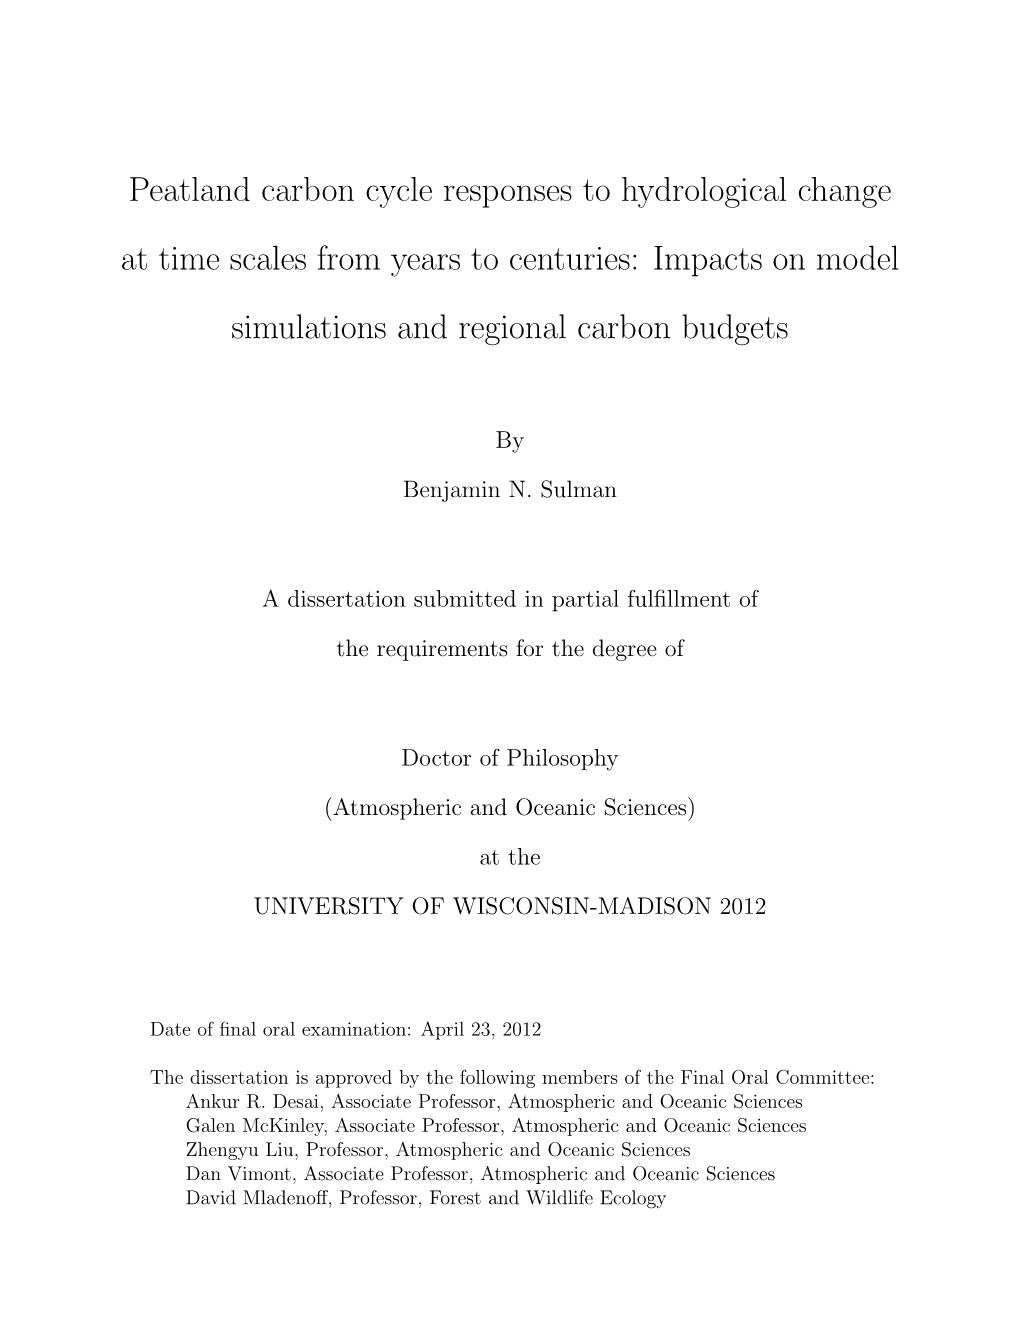 Peatland Carbon Cycle Responses to Hydrological Change at Time Scales from Years to Centuries: Impacts on Model Simulations and Regional Carbon Budgets